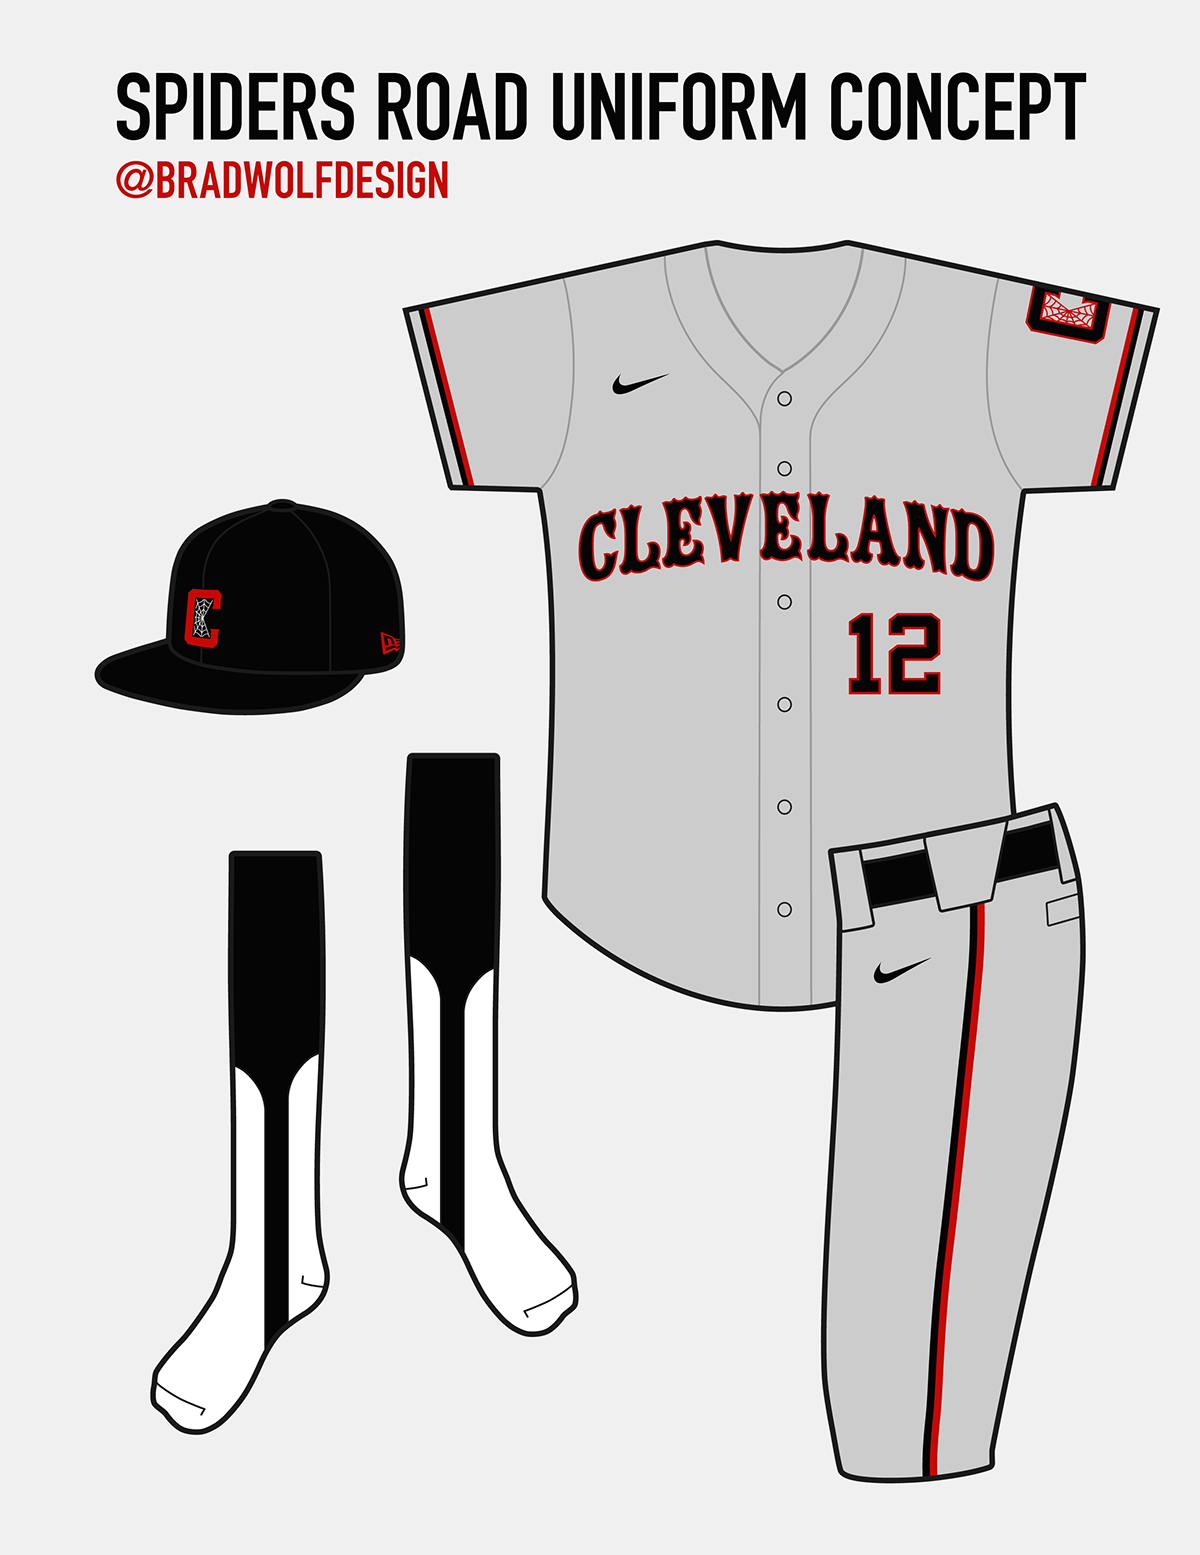 Cleveland Spiders (Sports Team)